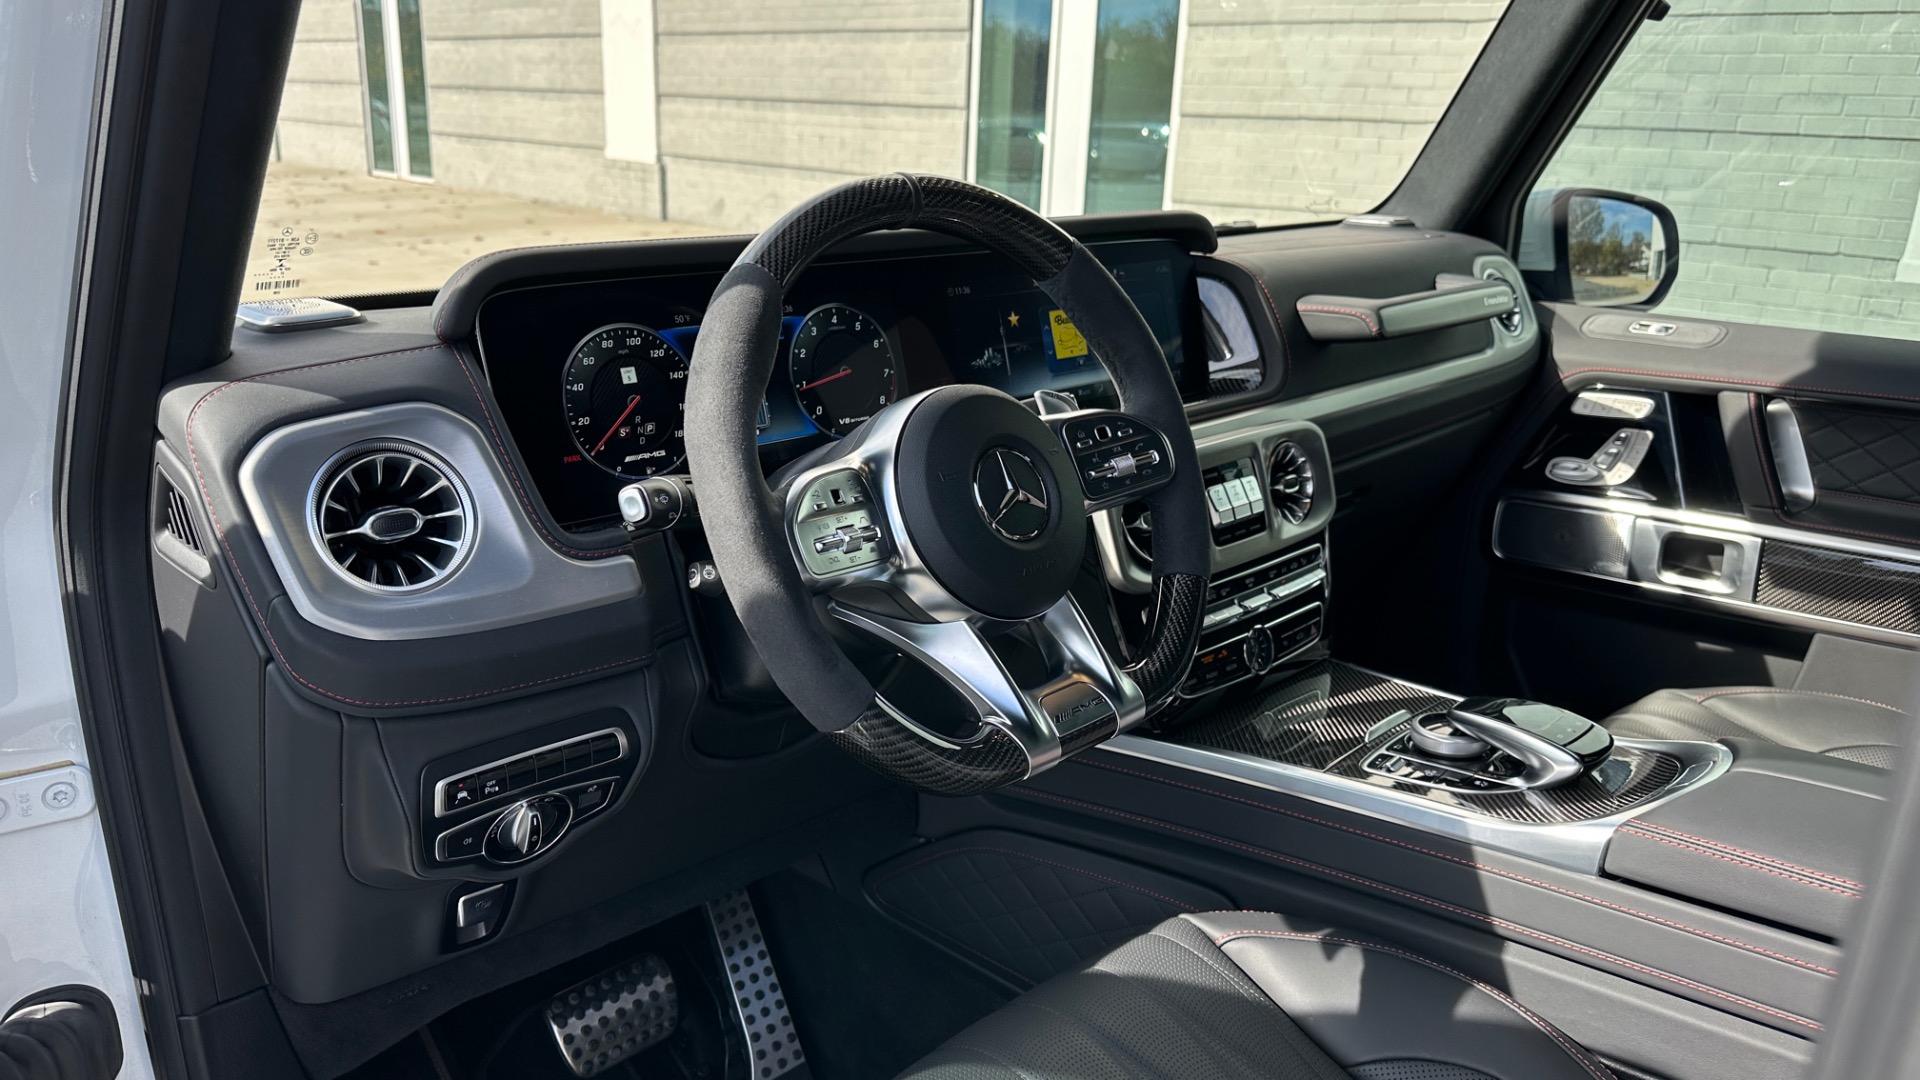 Used 2021 Mercedes-Benz G-Class AMG G63 / AMG EXCLUSIVE INTERIOR / CARBON FIBER / DIAMOND STITCH / 21IN AMG for sale $229,000 at Formula Imports in Charlotte NC 28227 37